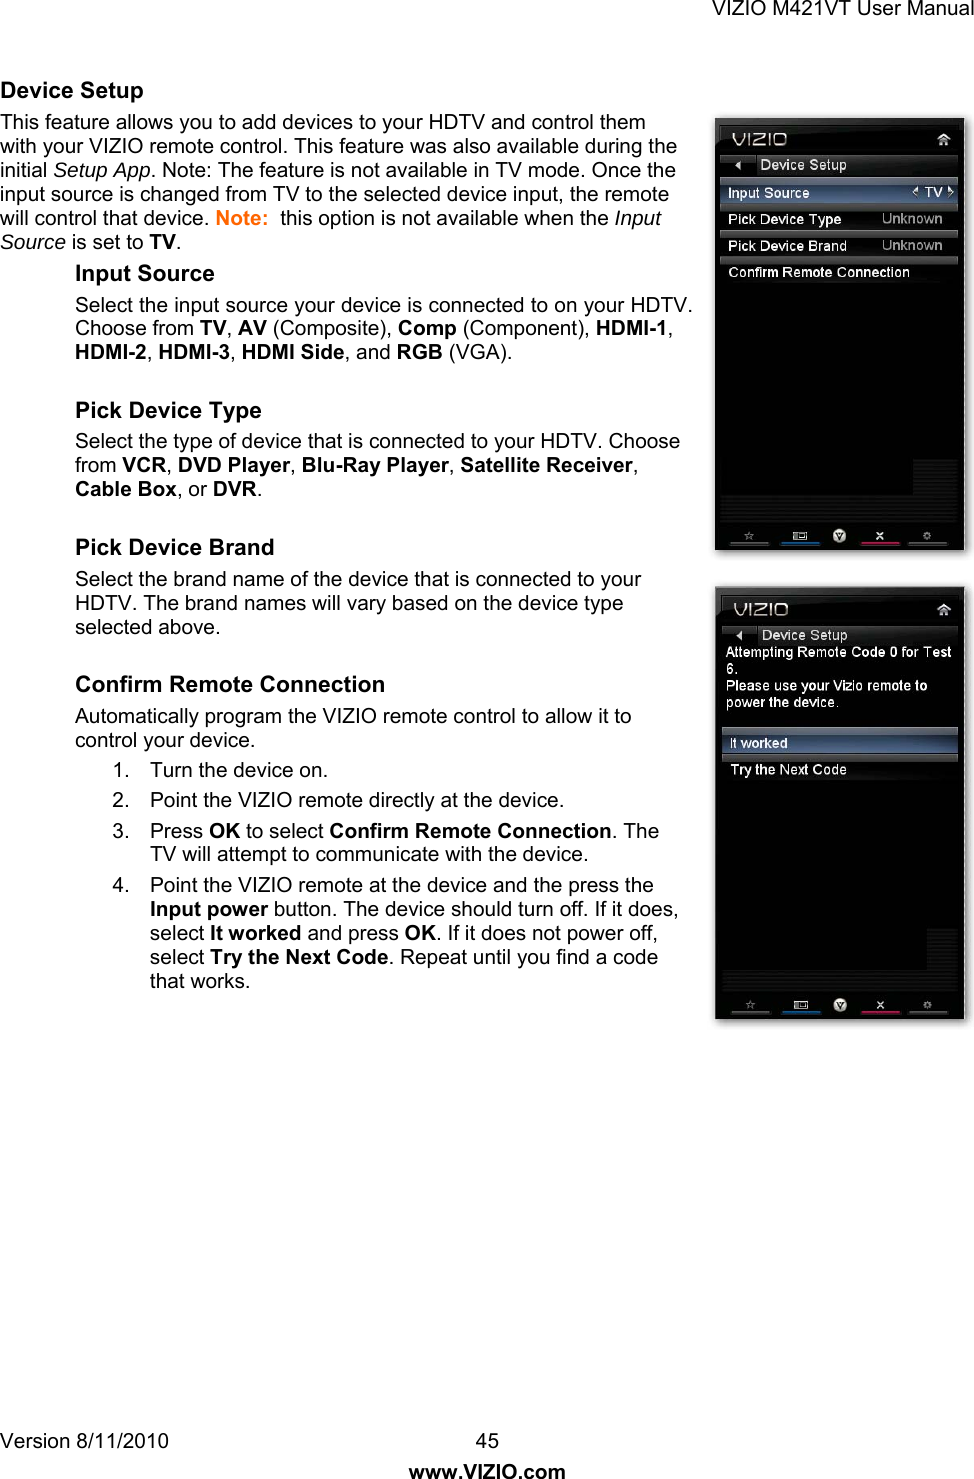 VIZIO M421VT User Manual Version 8/11/2010  45   www.VIZIO.com Device Setup This feature allows you to add devices to your HDTV and control them with your VIZIO remote control. This feature was also available during the initial Setup App. Note: The feature is not available in TV mode. Once the input source is changed from TV to the selected device input, the remote will control that device. Note:  this option is not available when the Input Source is set to TV. Input Source Select the input source your device is connected to on your HDTV. Choose from TV, AV (Composite), Comp (Component), HDMI-1, HDMI-2, HDMI-3, HDMI Side, and RGB (VGA).   Pick Device Type Select the type of device that is connected to your HDTV. Choose from VCR, DVD Player, Blu-Ray Player, Satellite Receiver, Cable Box, or DVR.  Pick Device Brand Select the brand name of the device that is connected to your HDTV. The brand names will vary based on the device type selected above.  Confirm Remote Connection Automatically program the VIZIO remote control to allow it to control your device. 1.  Turn the device on. 2.  Point the VIZIO remote directly at the device. 3. Press OK to select Confirm Remote Connection. The TV will attempt to communicate with the device.  4.  Point the VIZIO remote at the device and the press the Input power button. The device should turn off. If it does, select It worked and press OK. If it does not power off, select Try the Next Code. Repeat until you find a code that works.   